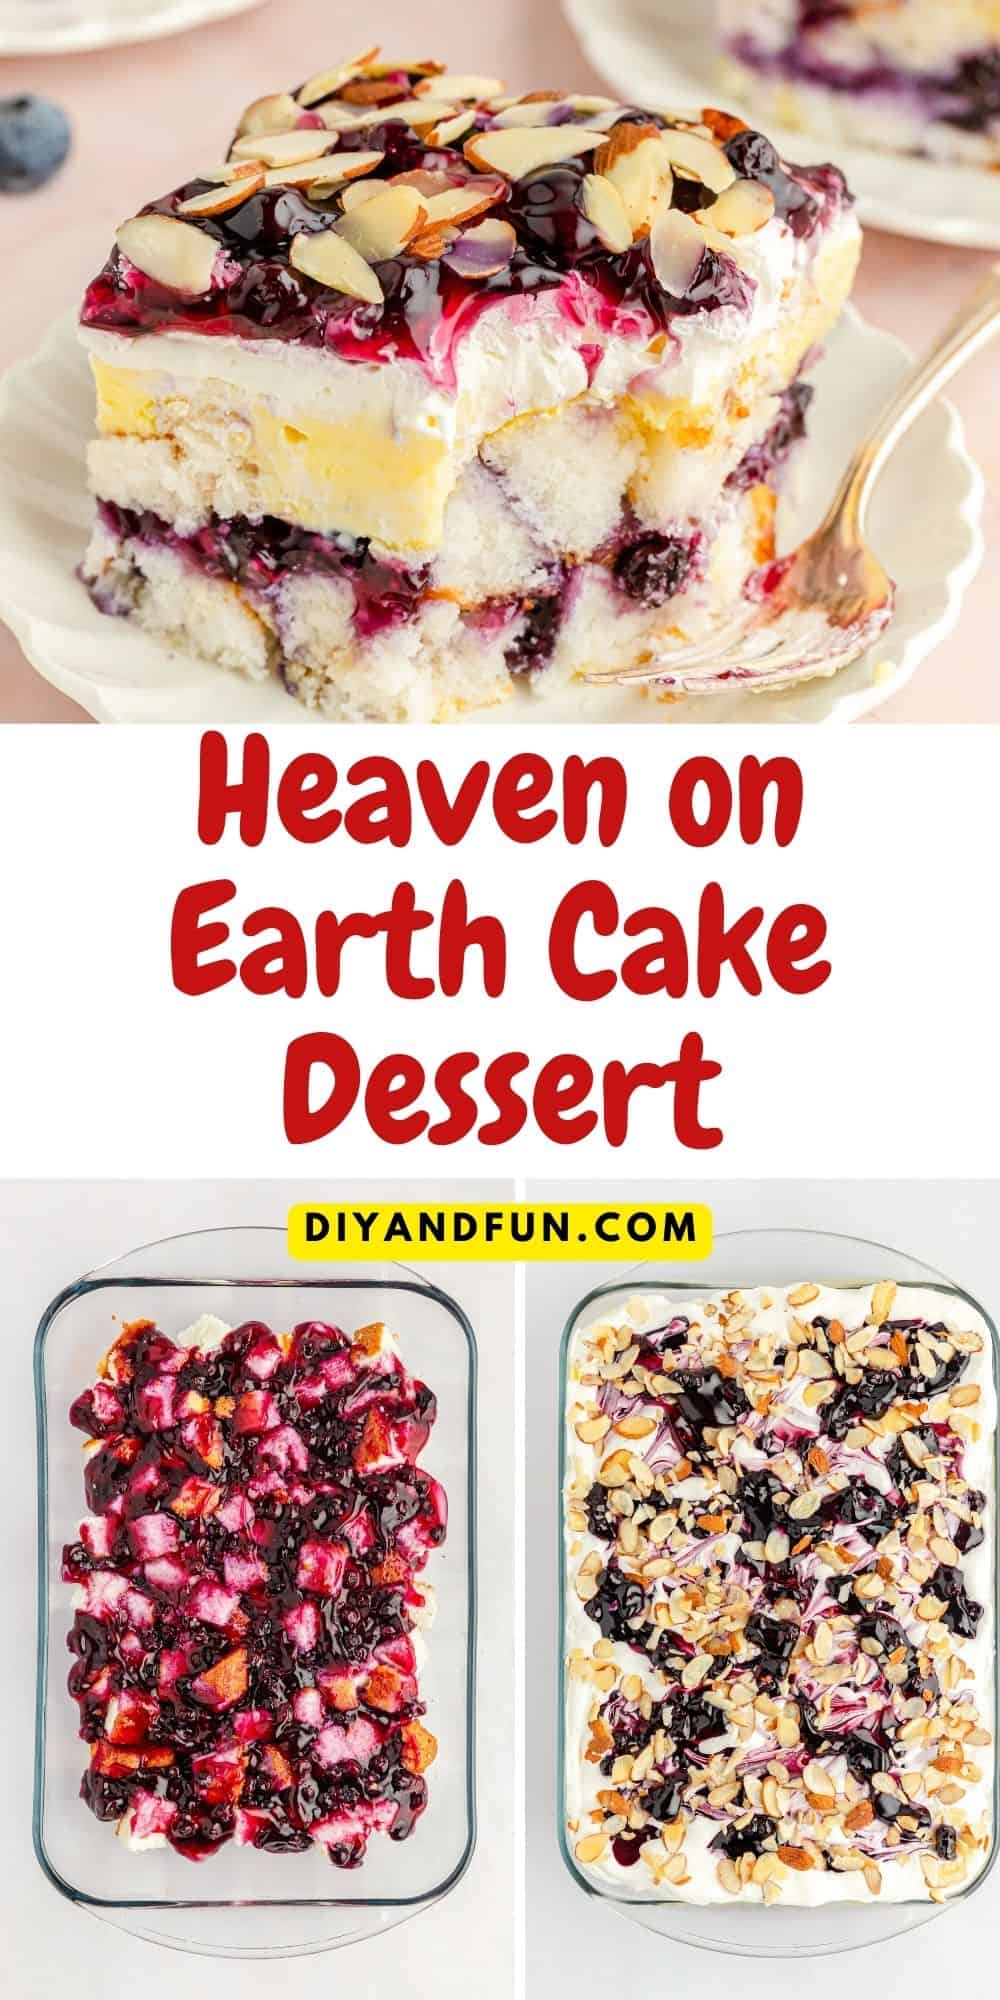 Heaven on Earth Cake Dessert, a delicious and simple  dessert recipe featuring blueberries with layers of pudding and angel food cake.